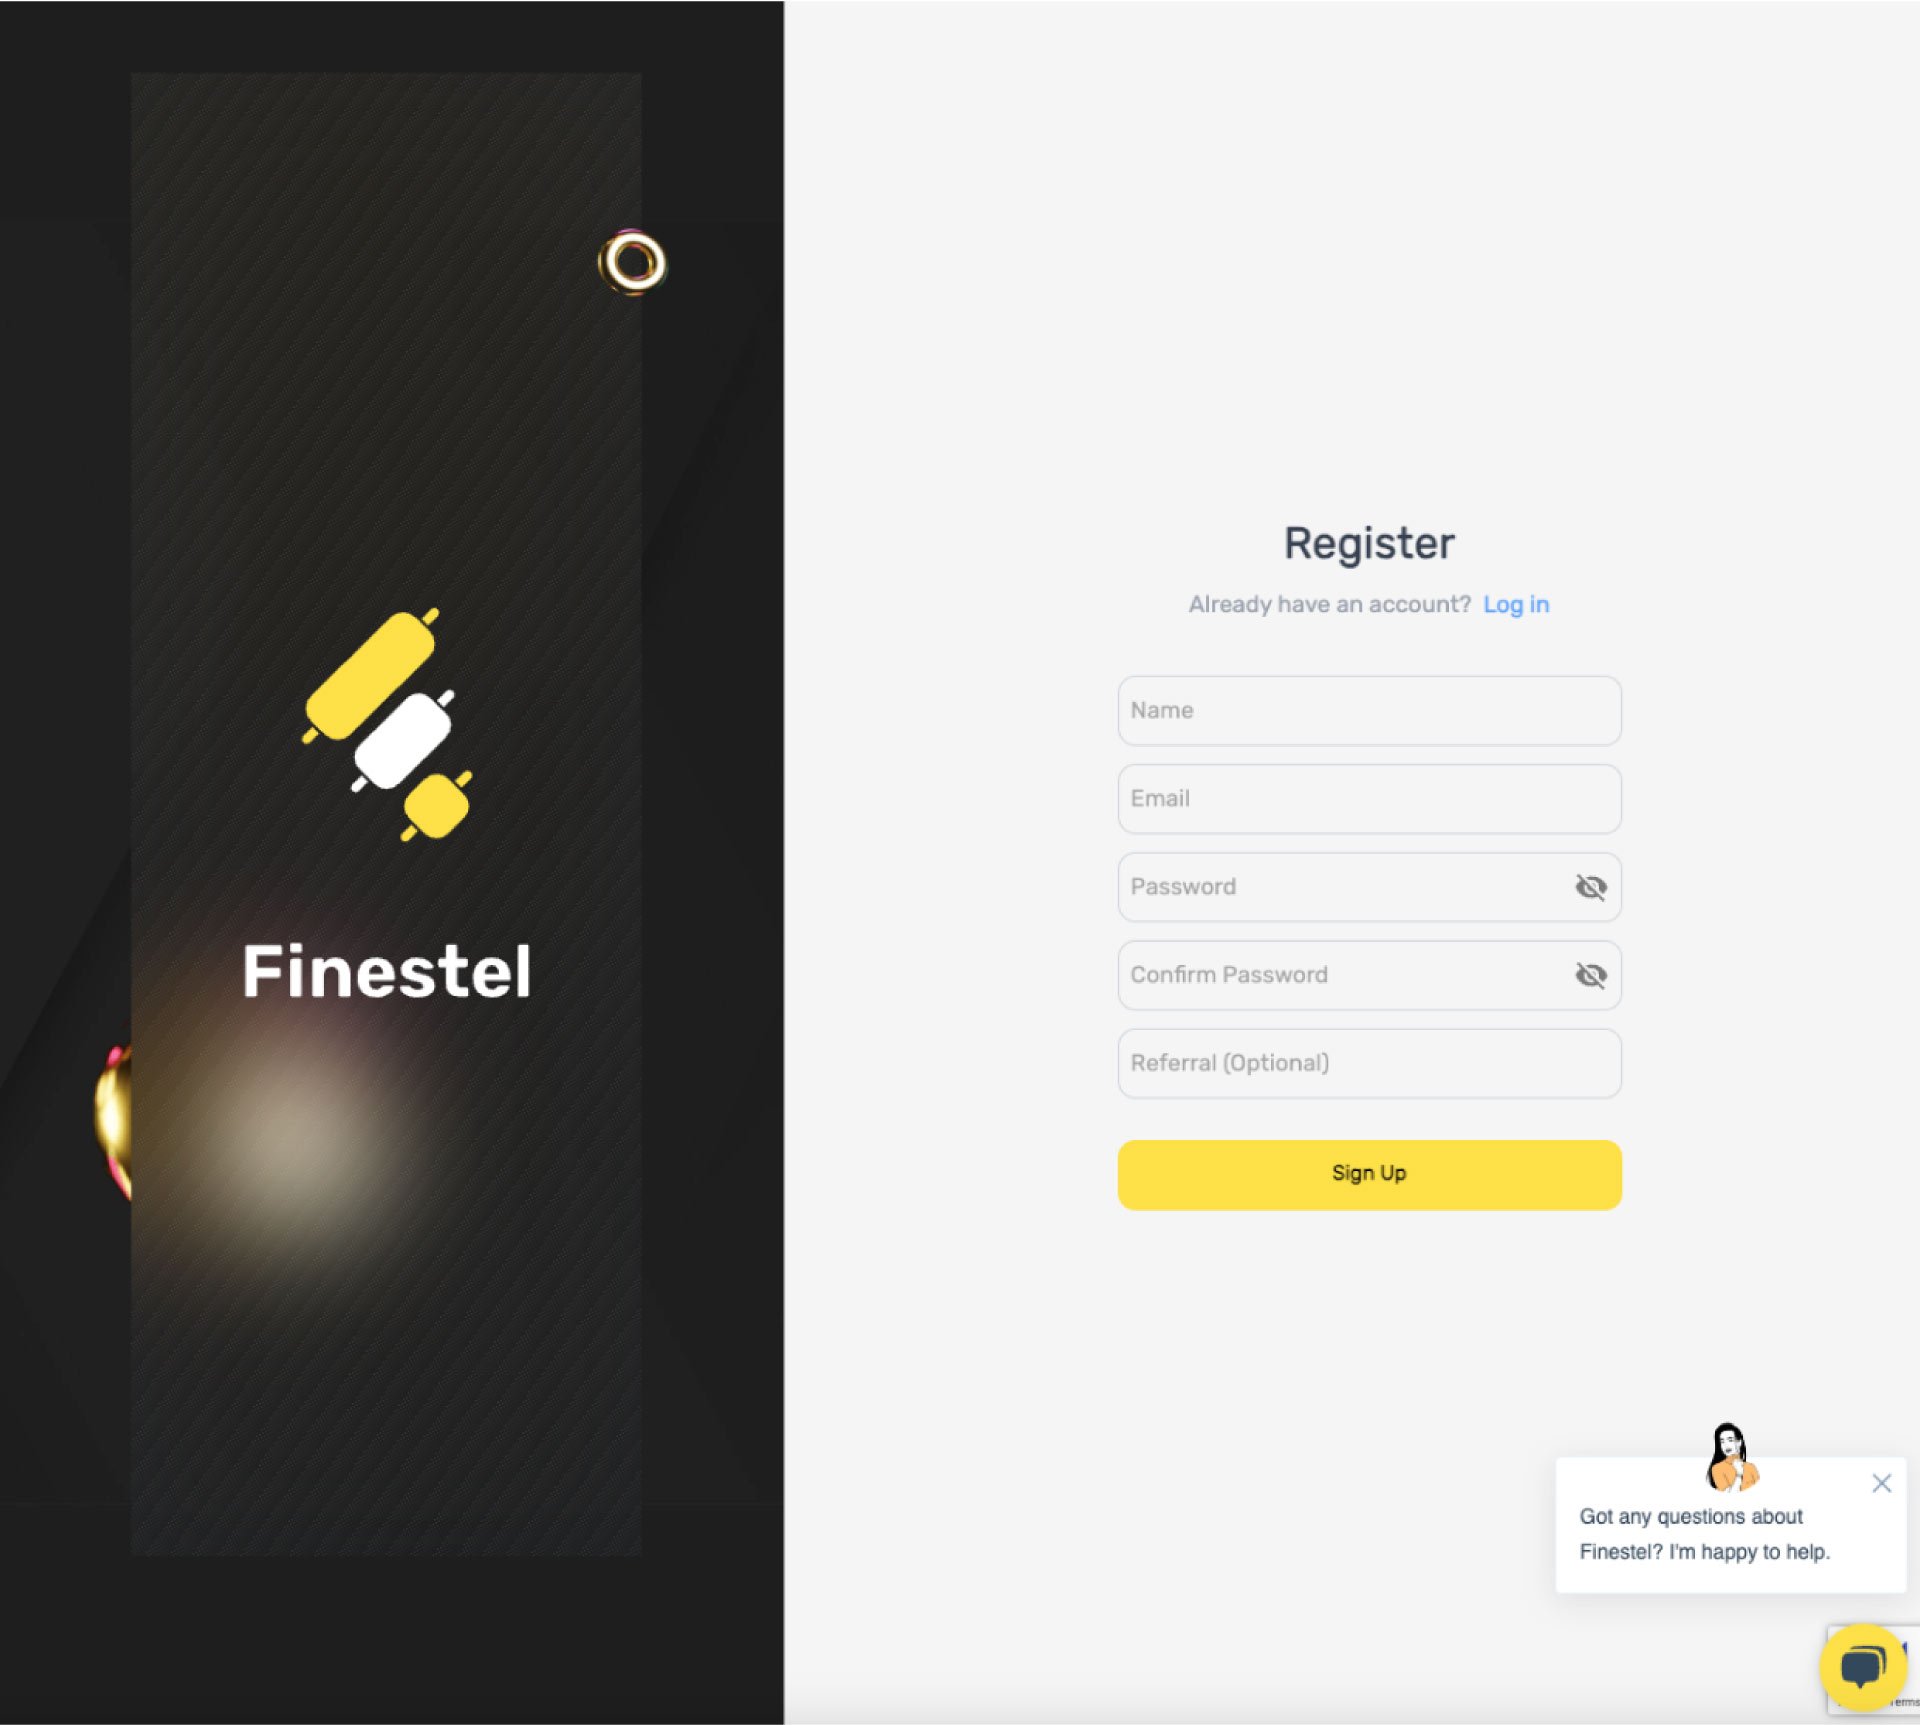 How to Register on Finestel